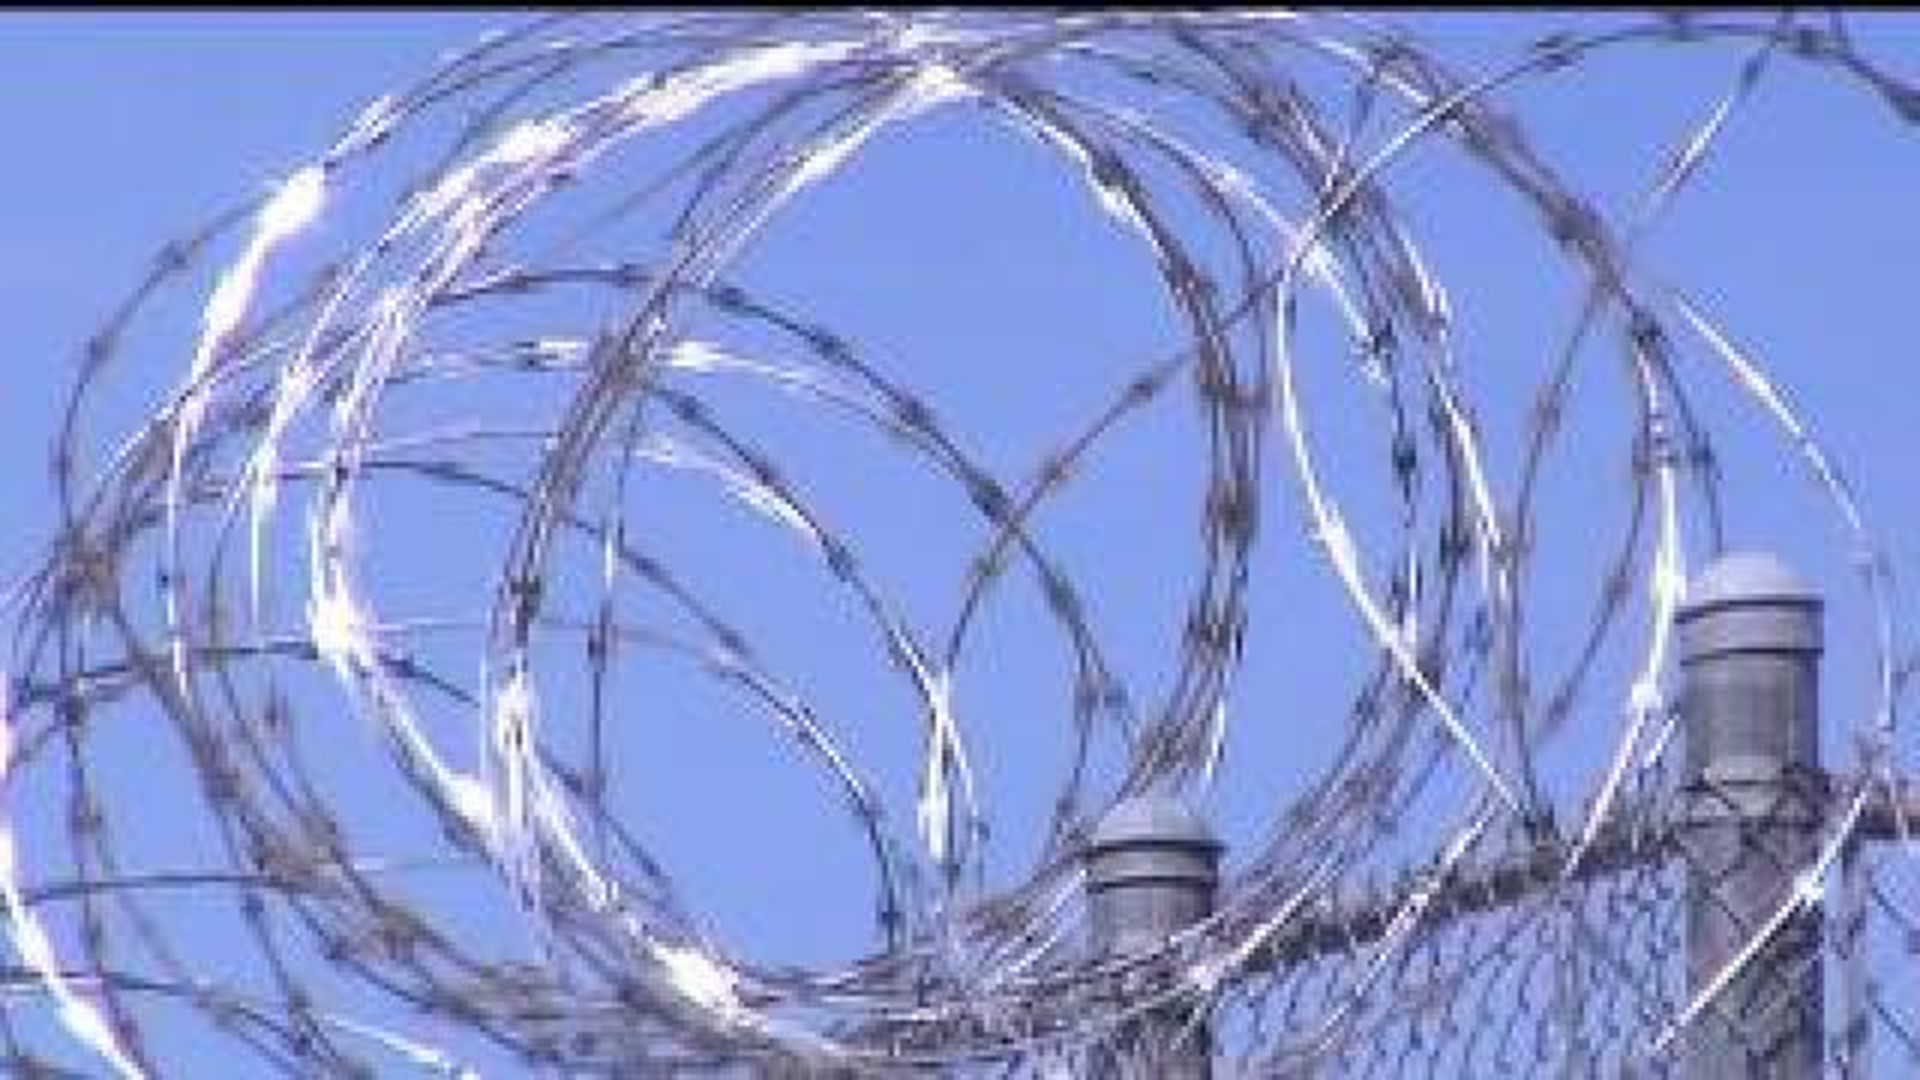 Inmates to transfer out of prison in Ft. Madison